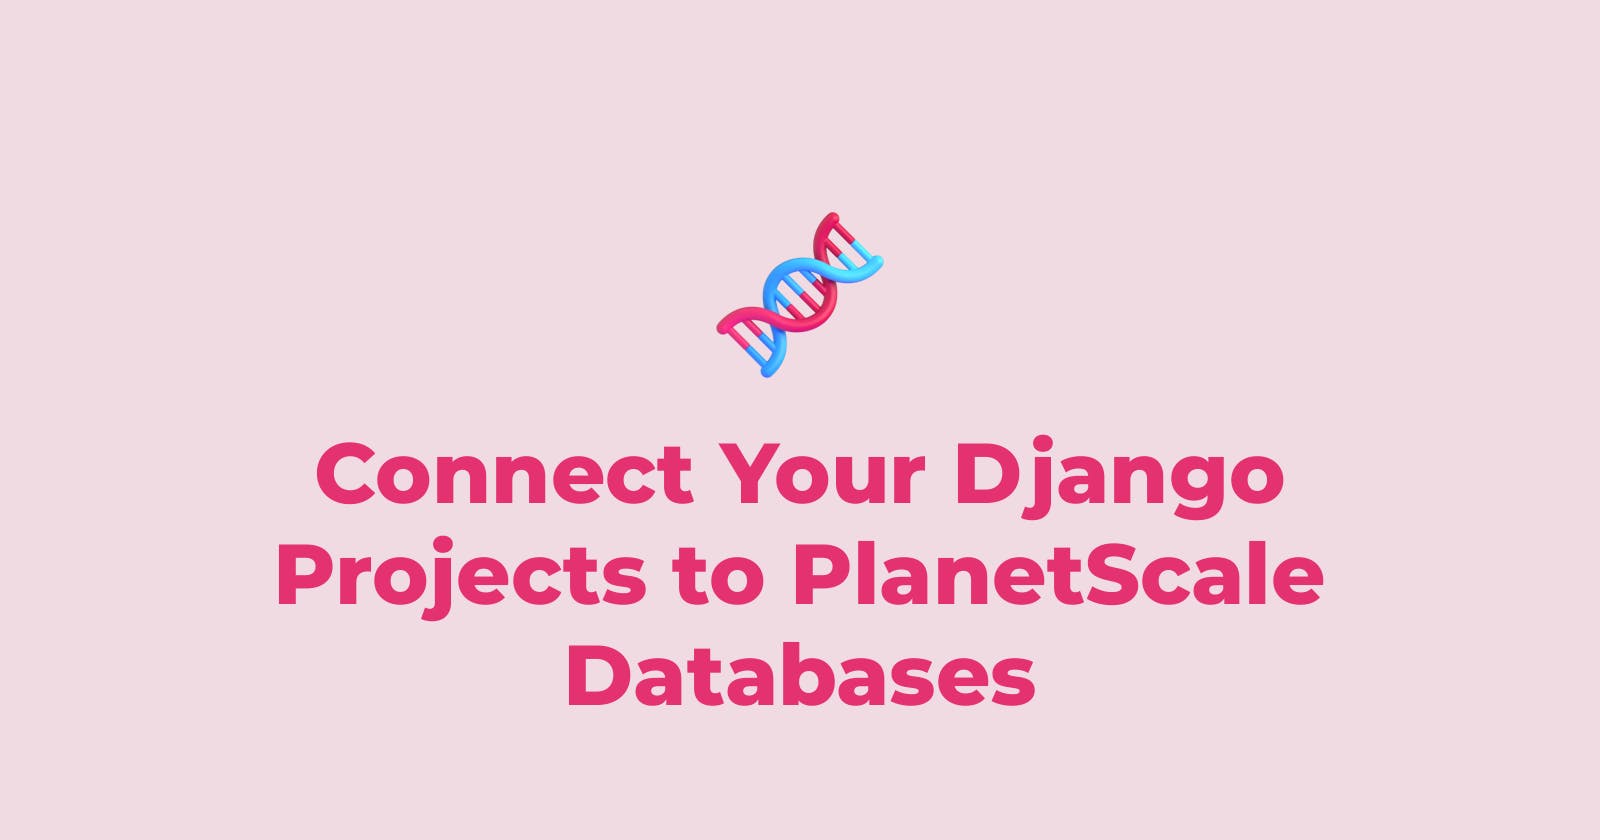 Connect Your Django Projects to PlanetScale Databases